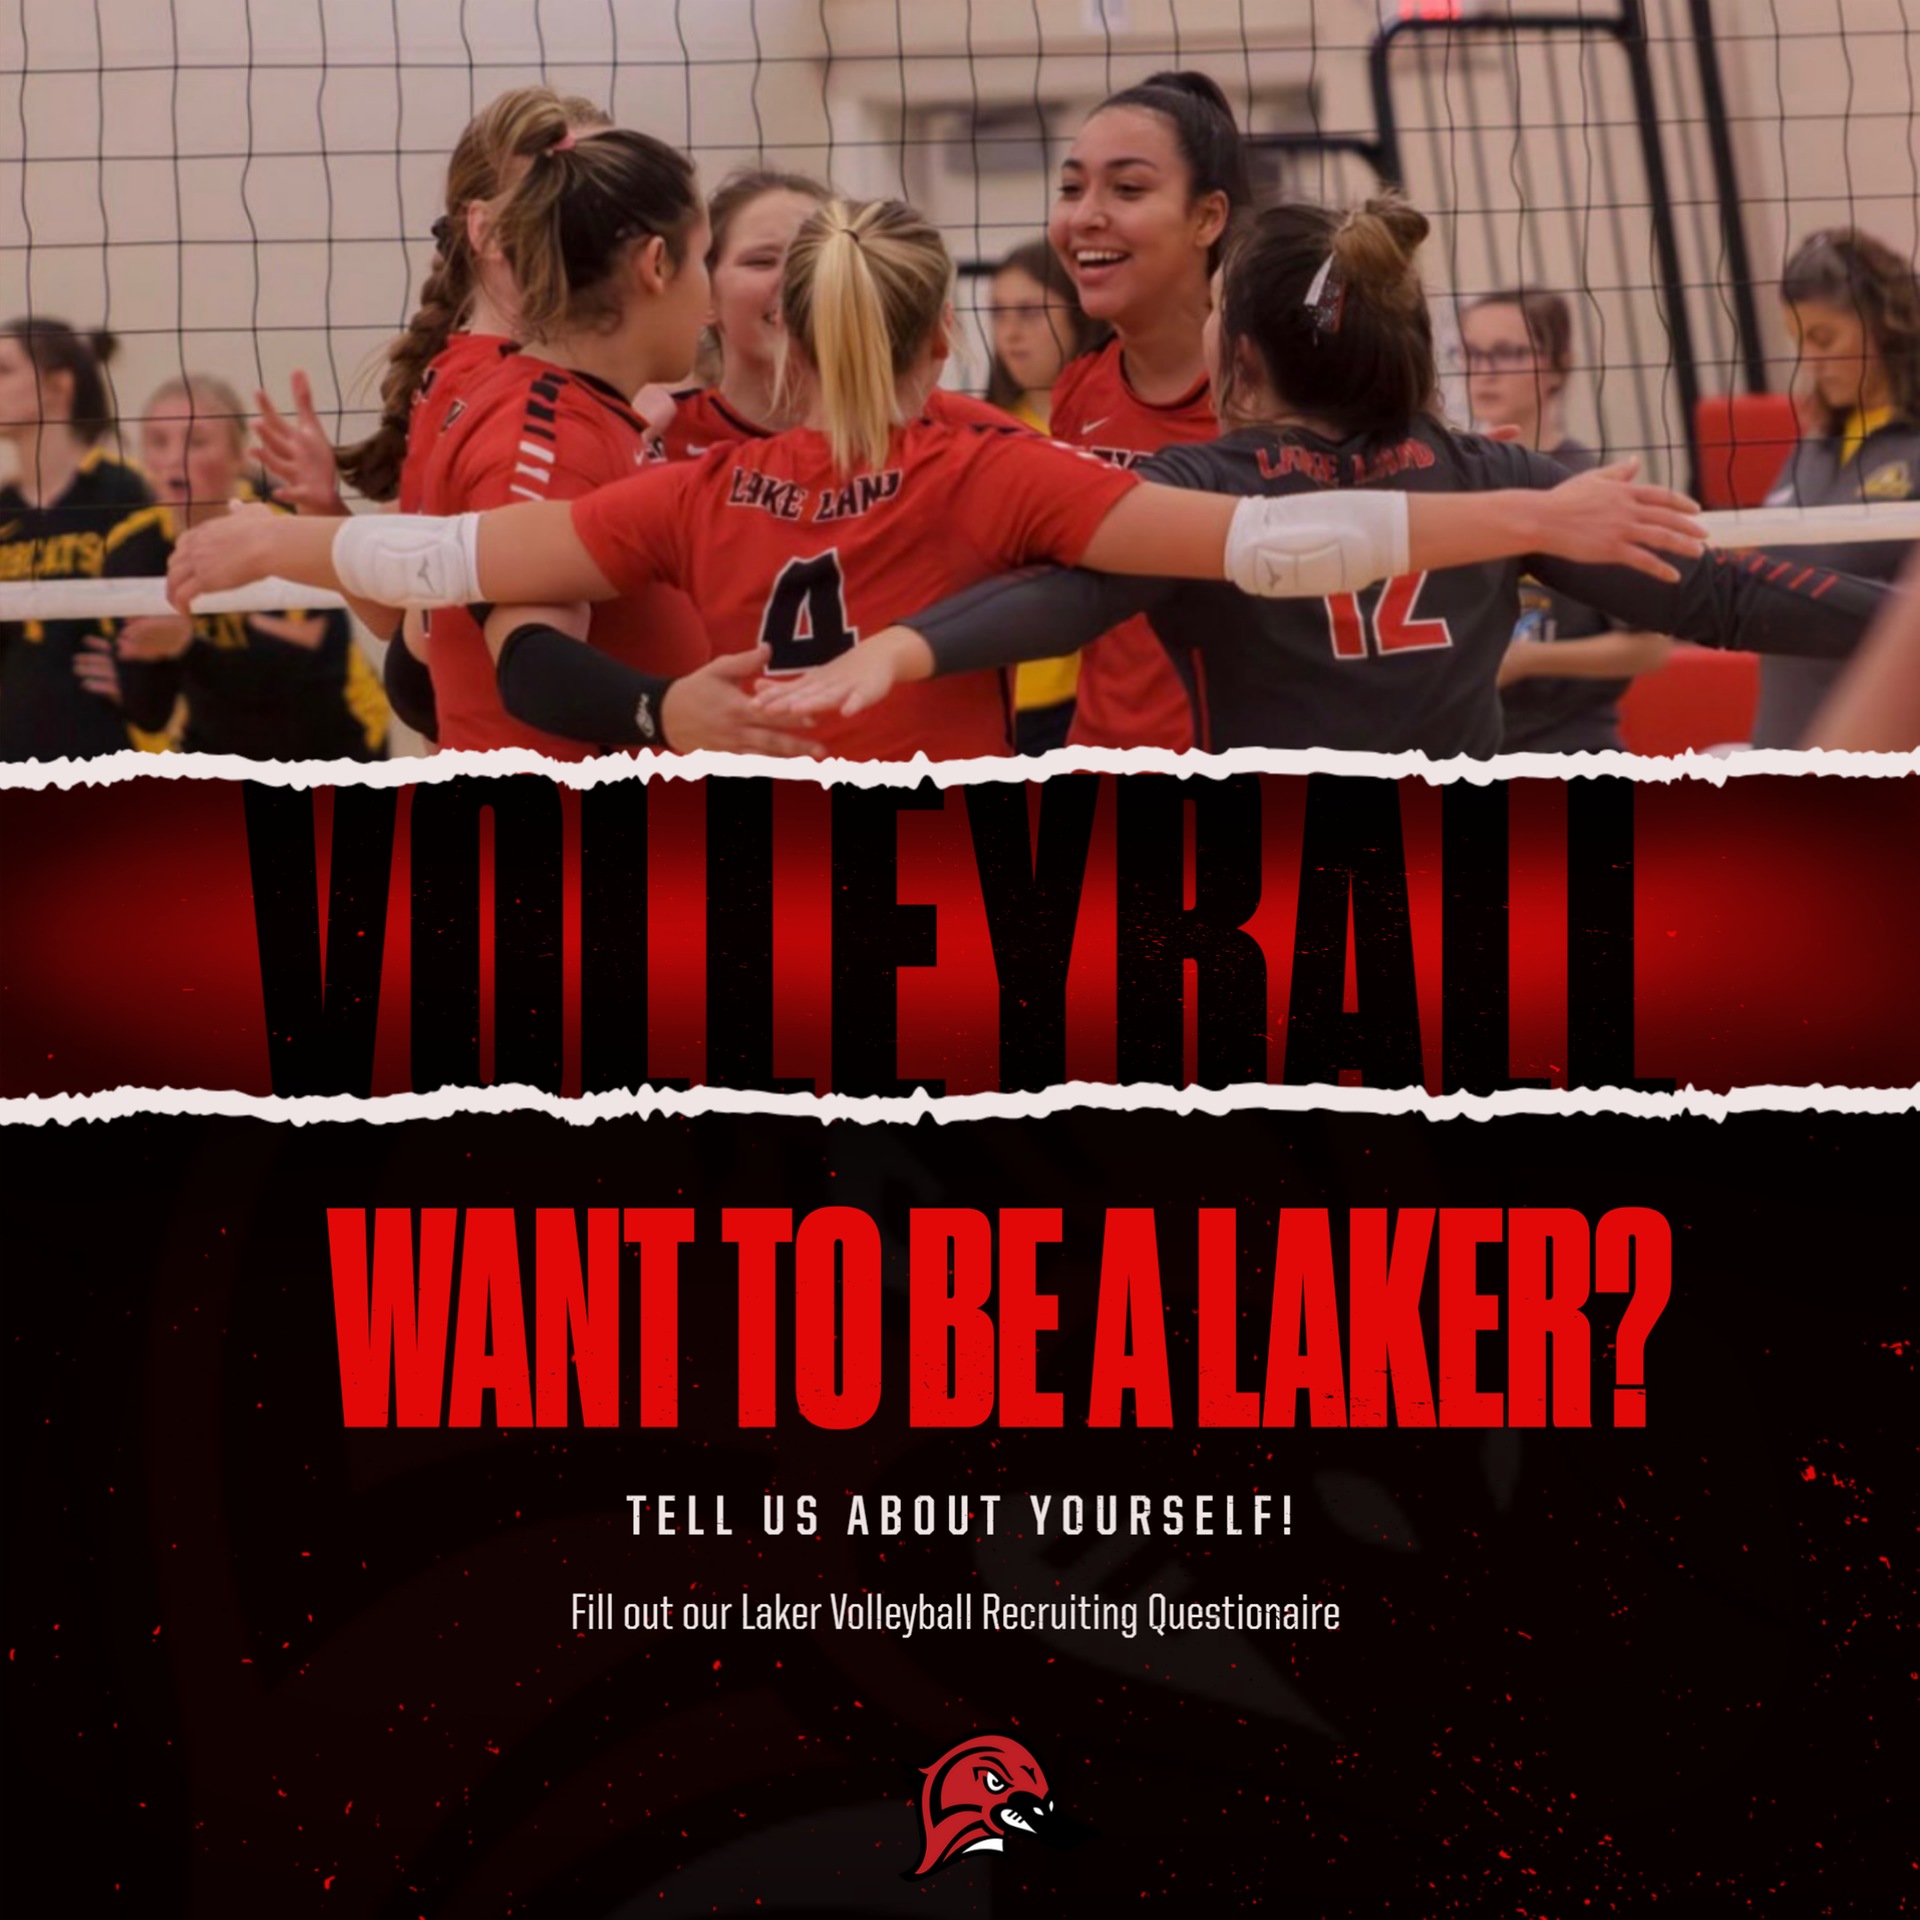 WANT TO BE A LAKER? WANT TO PLAY VOLLEYBALL- FILL OUT THE RECRUIT ME LINK